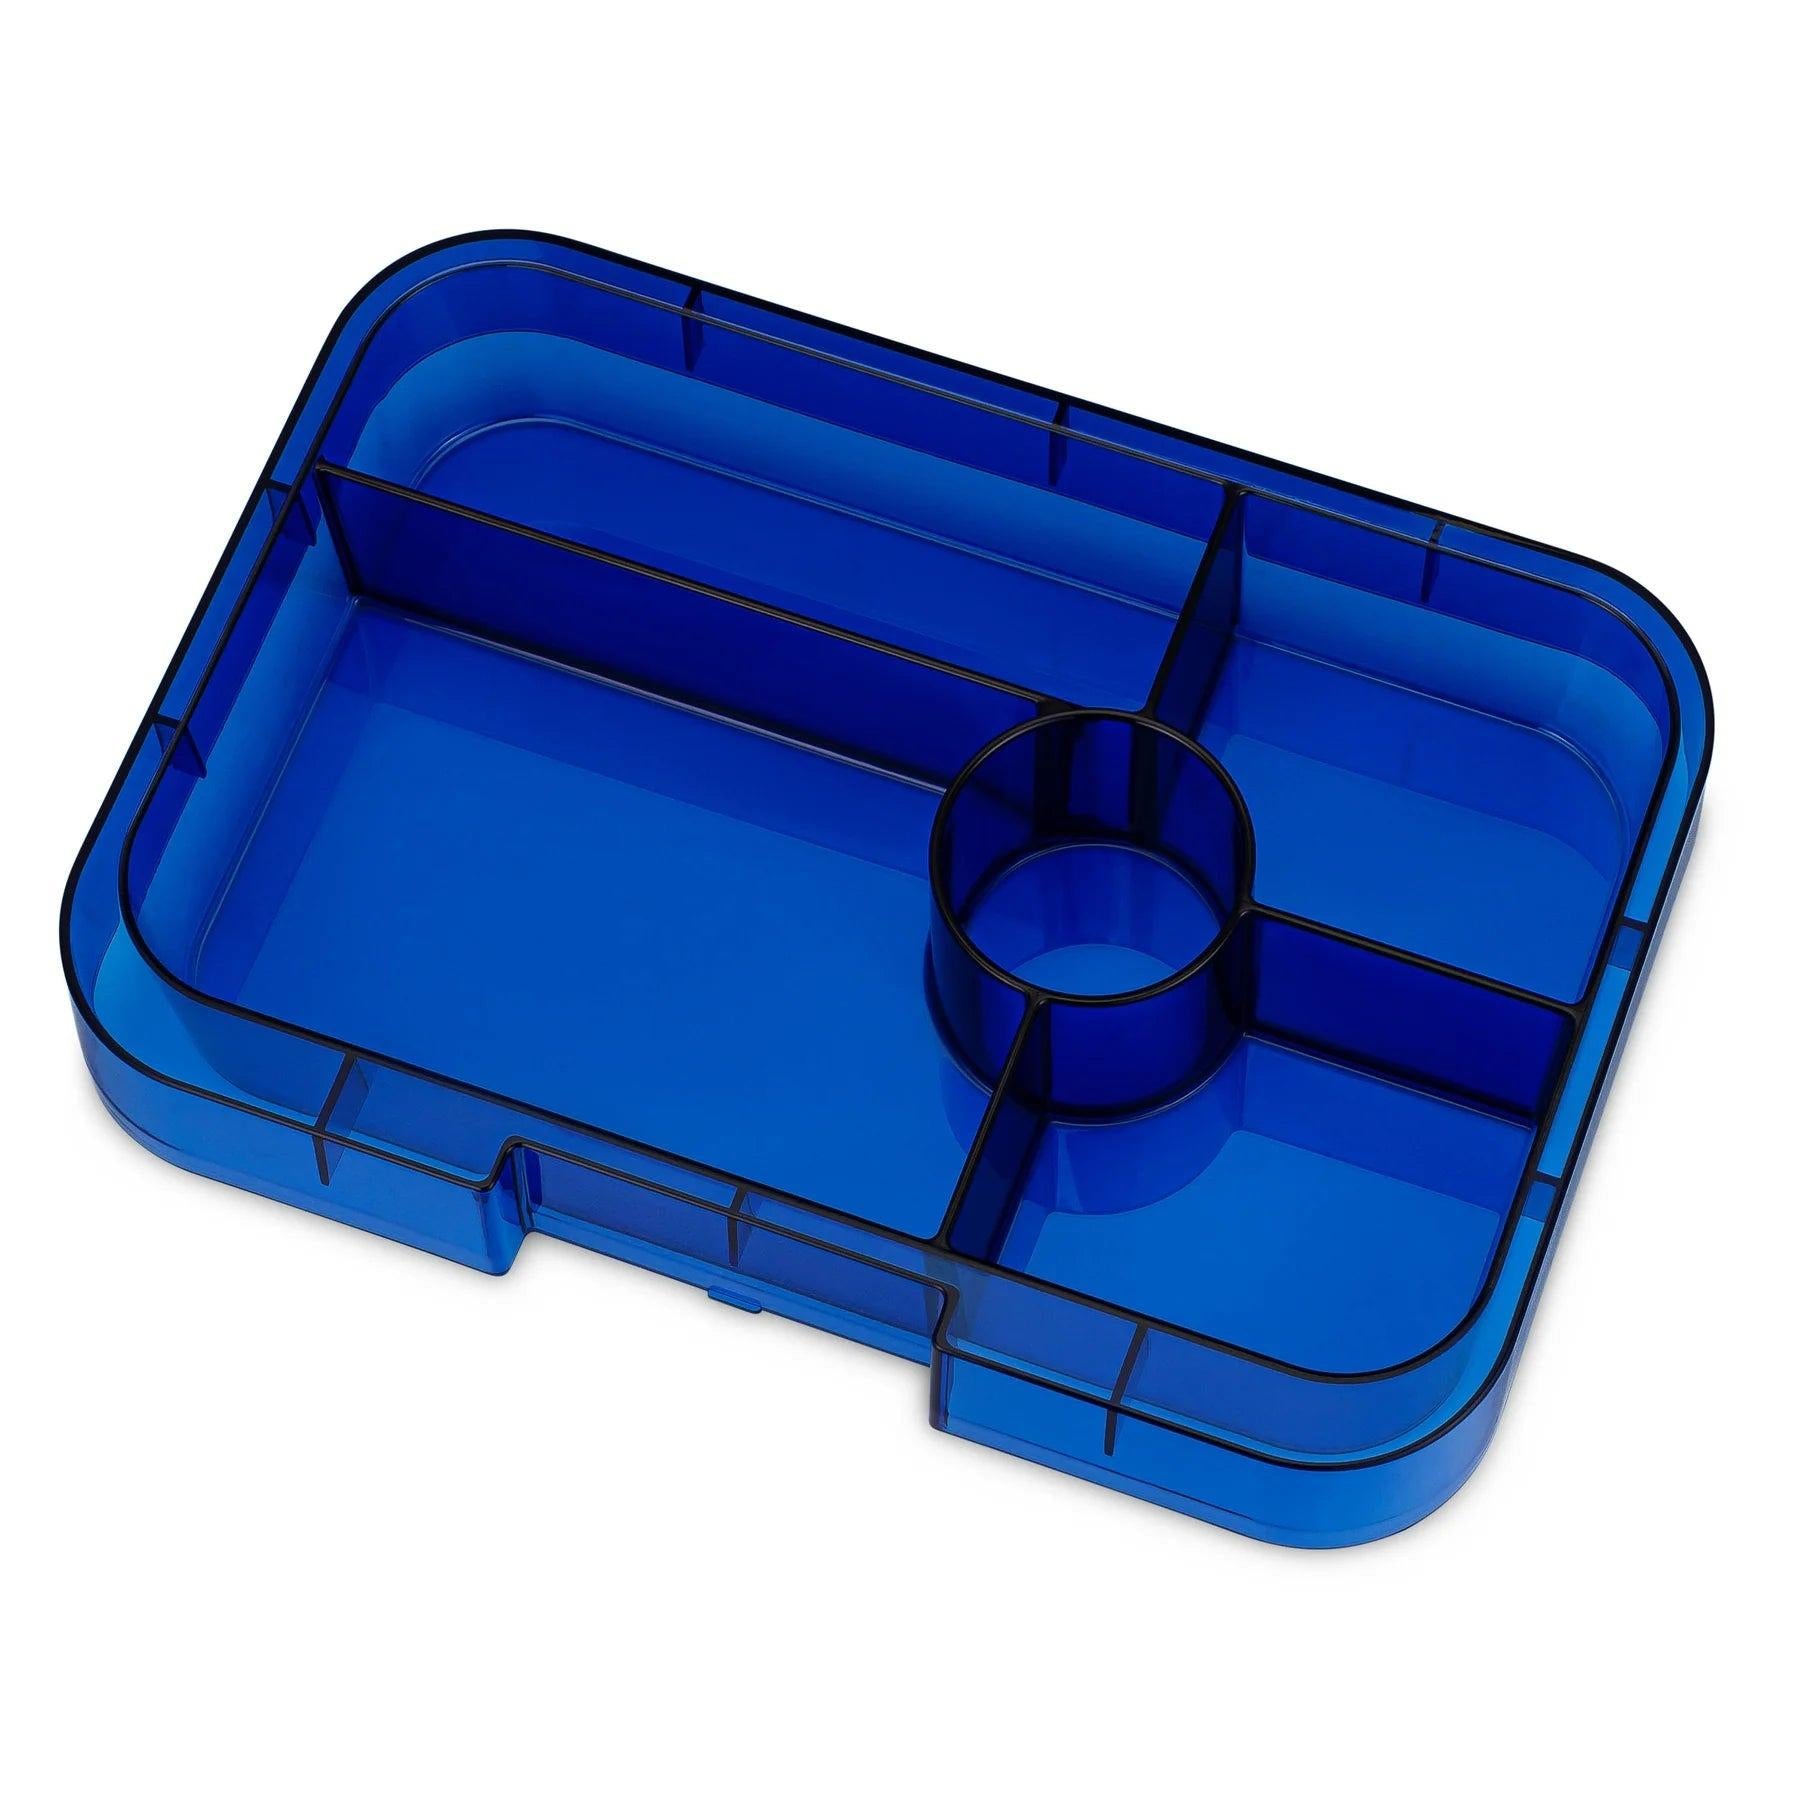 Yumbox Tapas 5 Compartment Replacement Tray Navy Blue